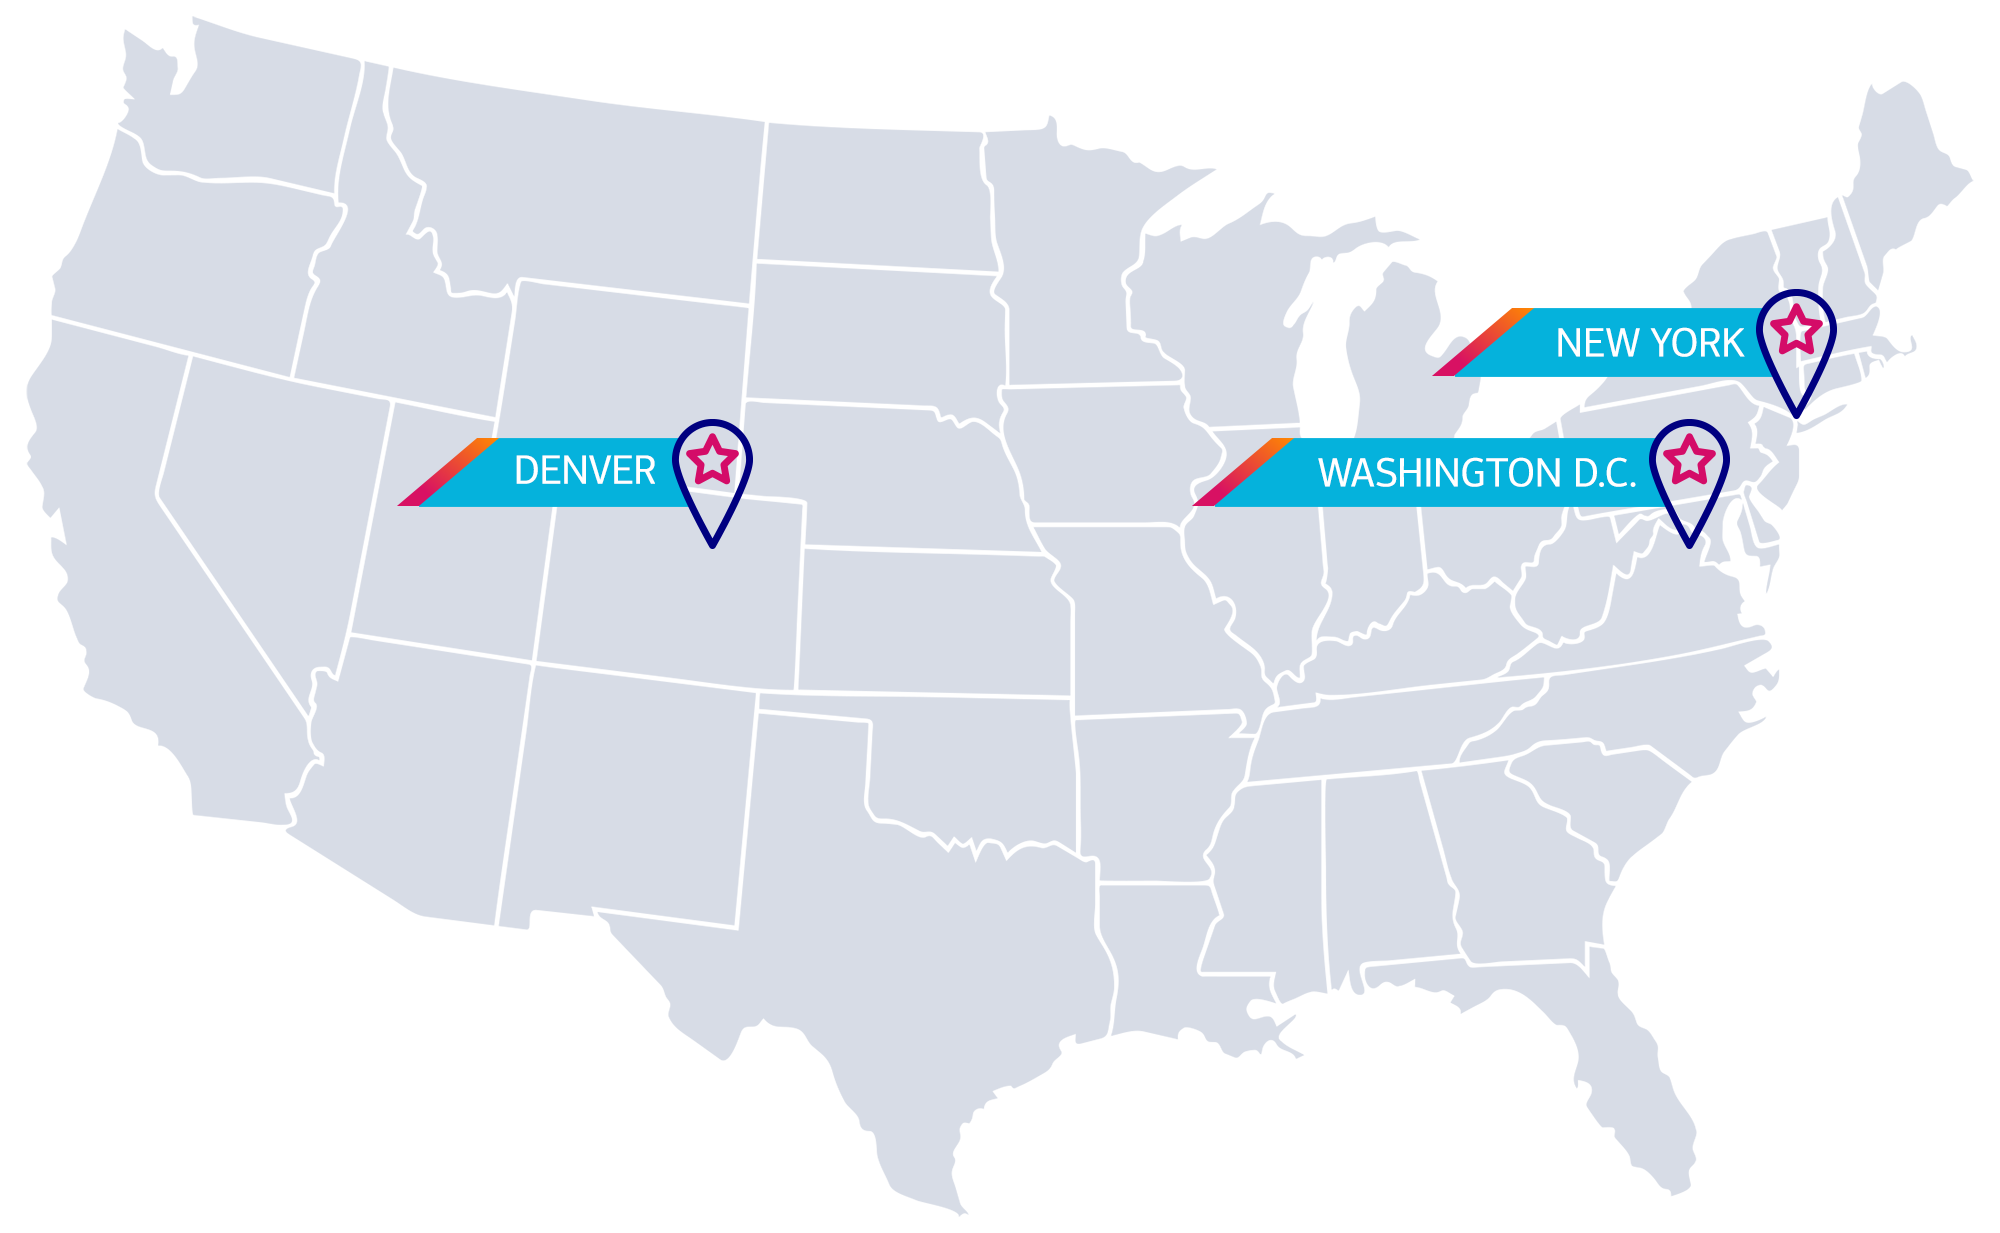 DAS42 location map with offices in Denver, New York and Washington D.C.